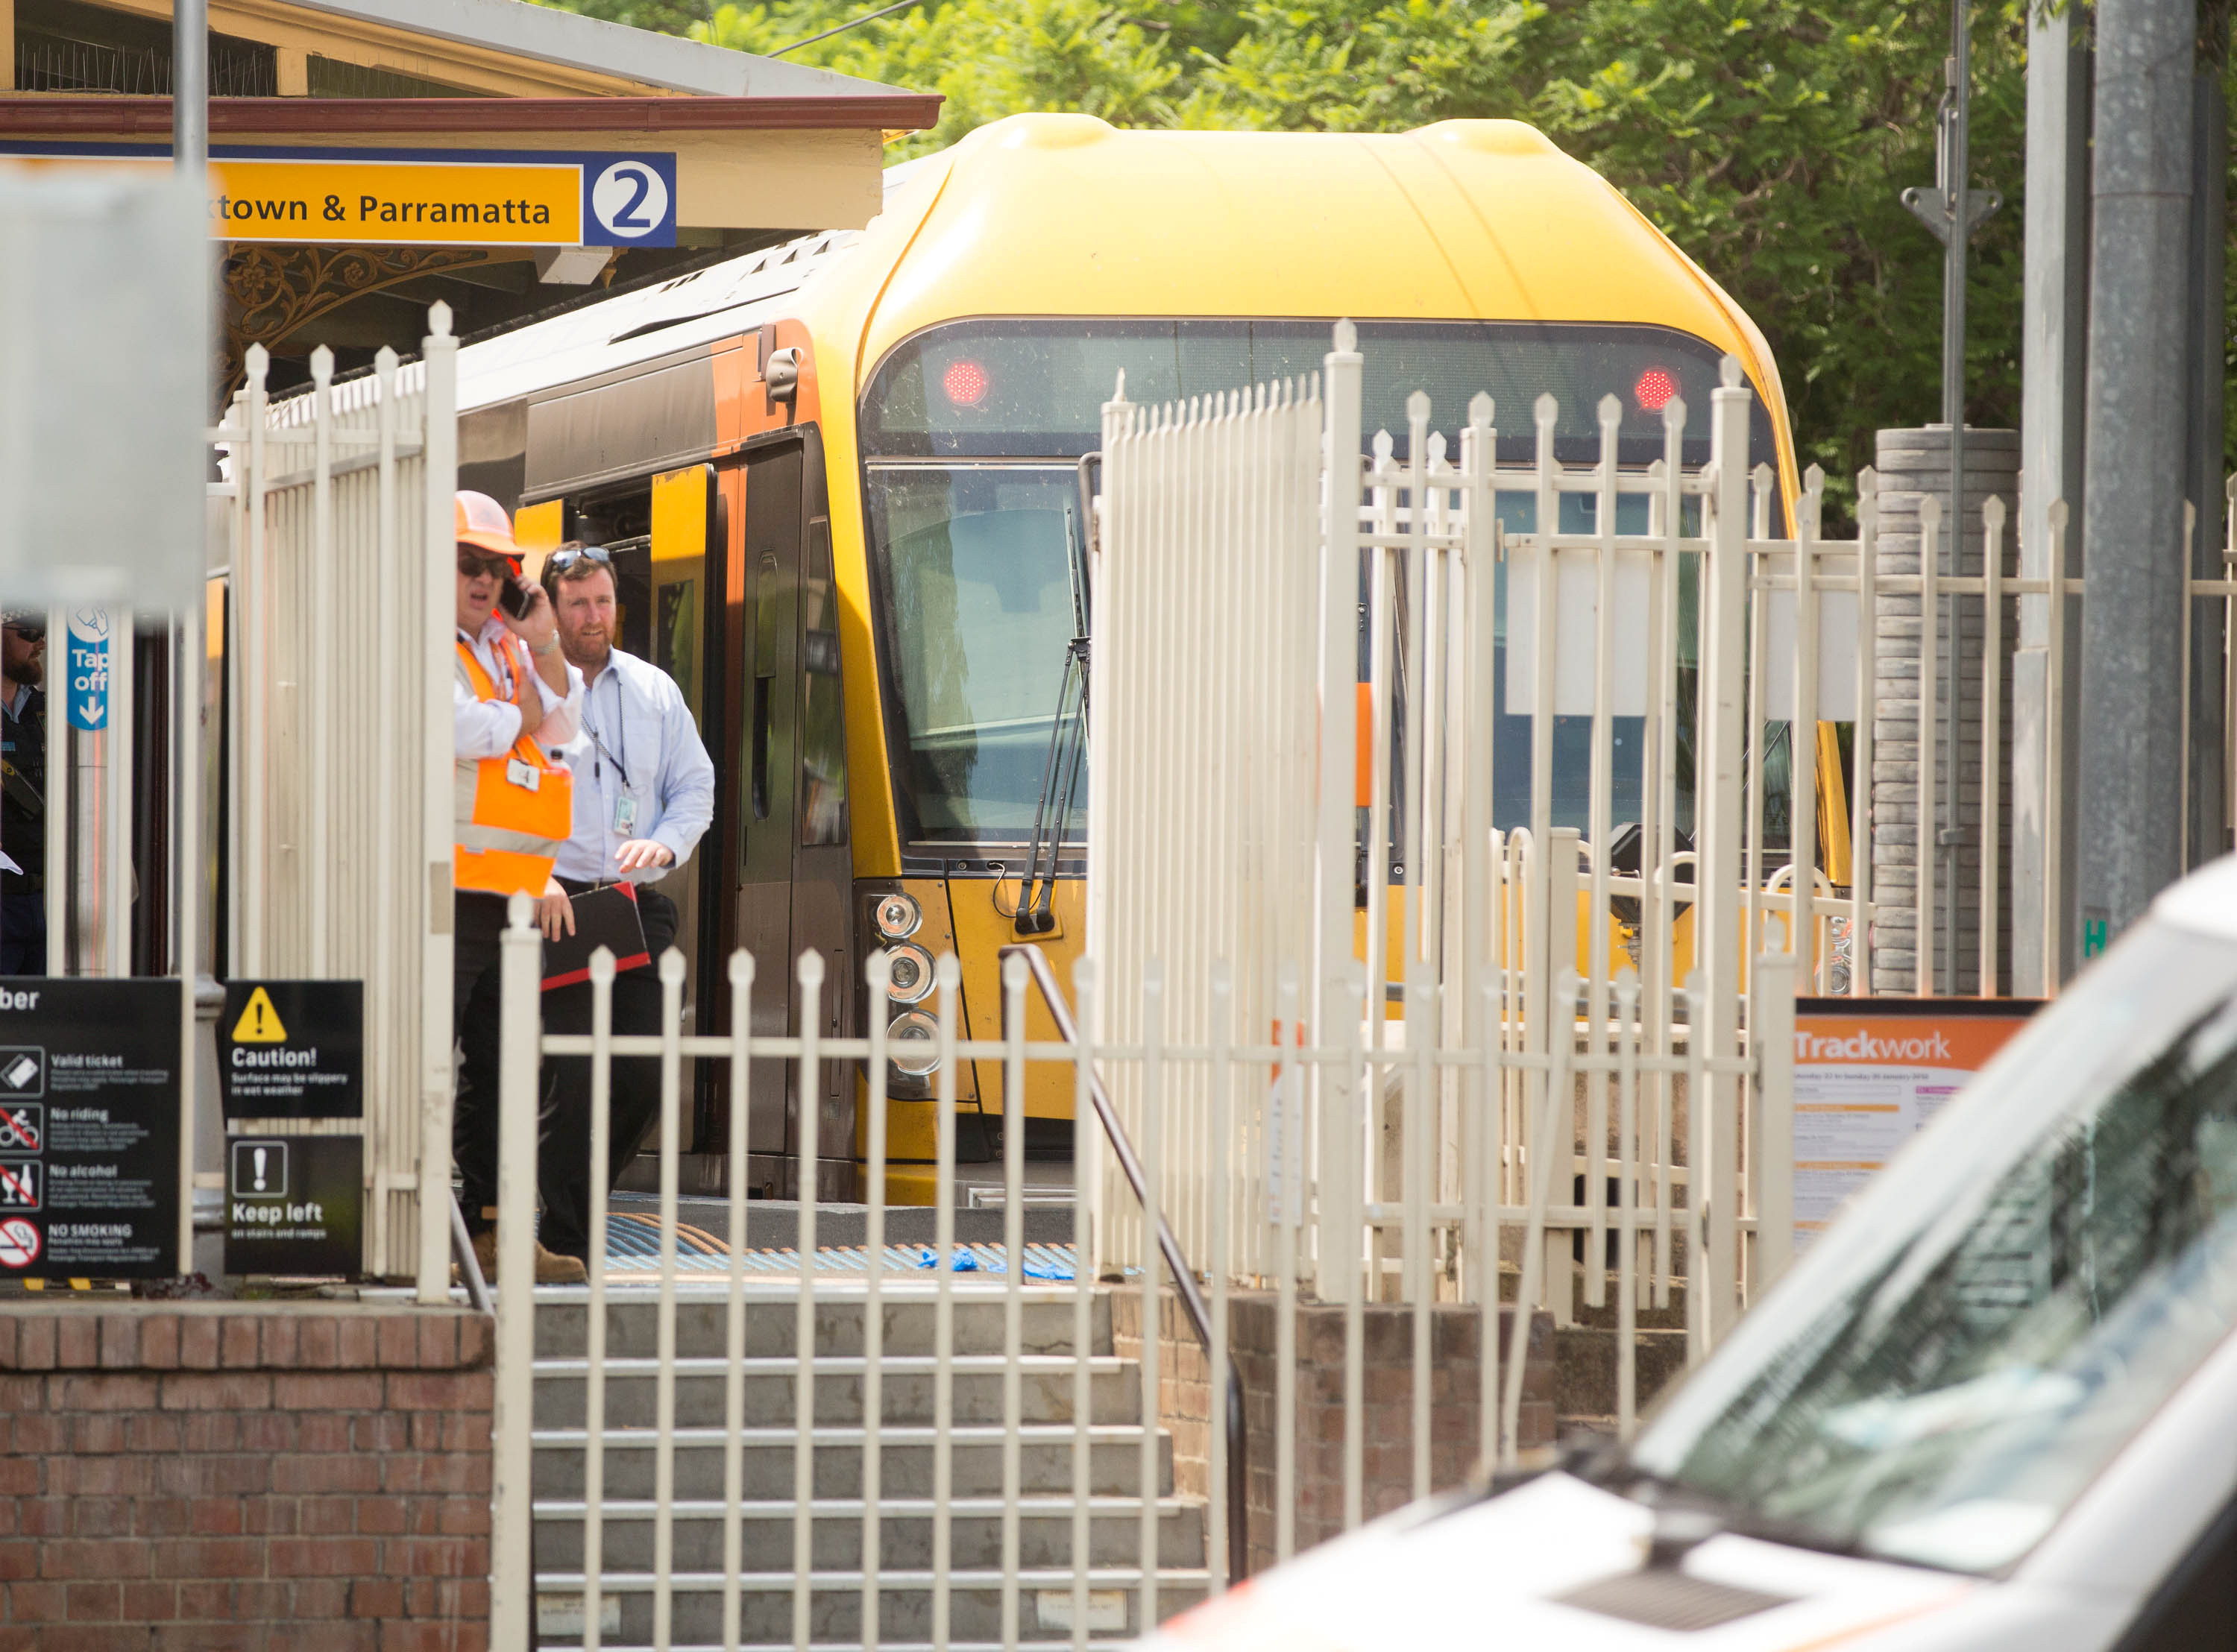 15 injured as train hits barrier in Sydney